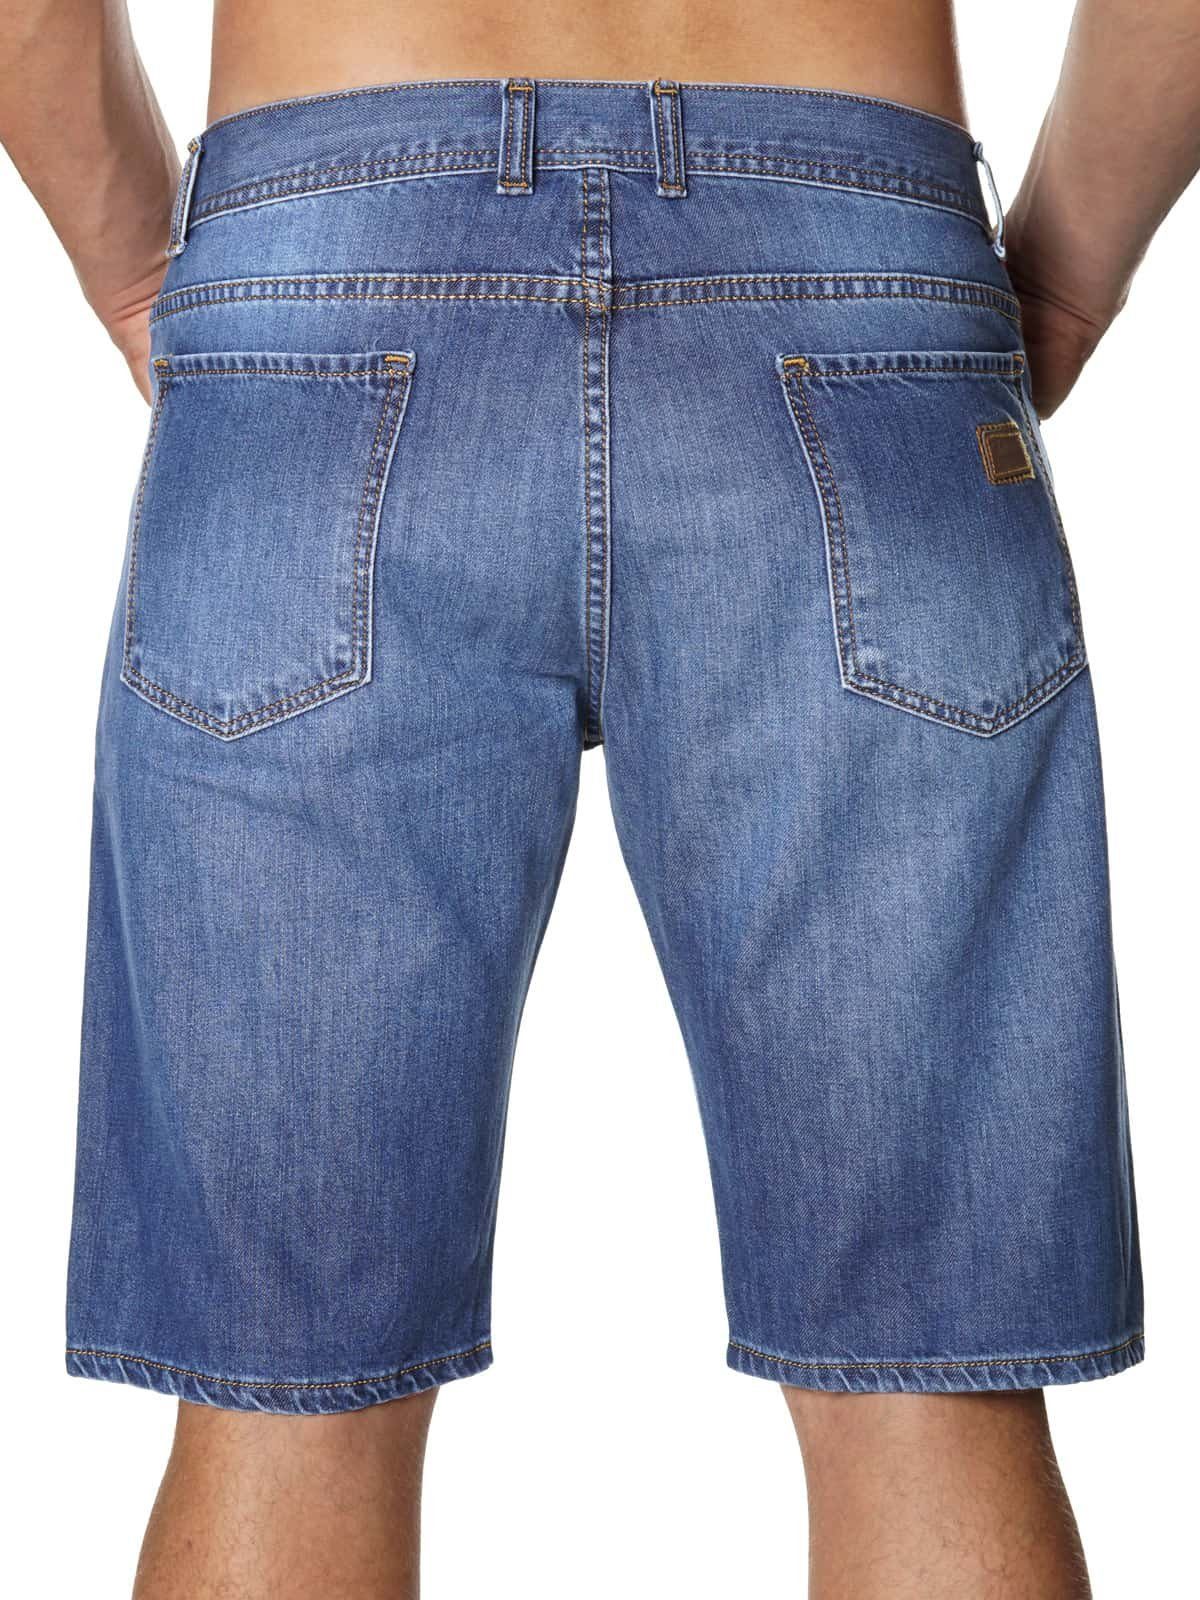 Stanley Jeans Jeansshorts Shorts Herren Chino 22743 Jeans 011 (1-tlg)